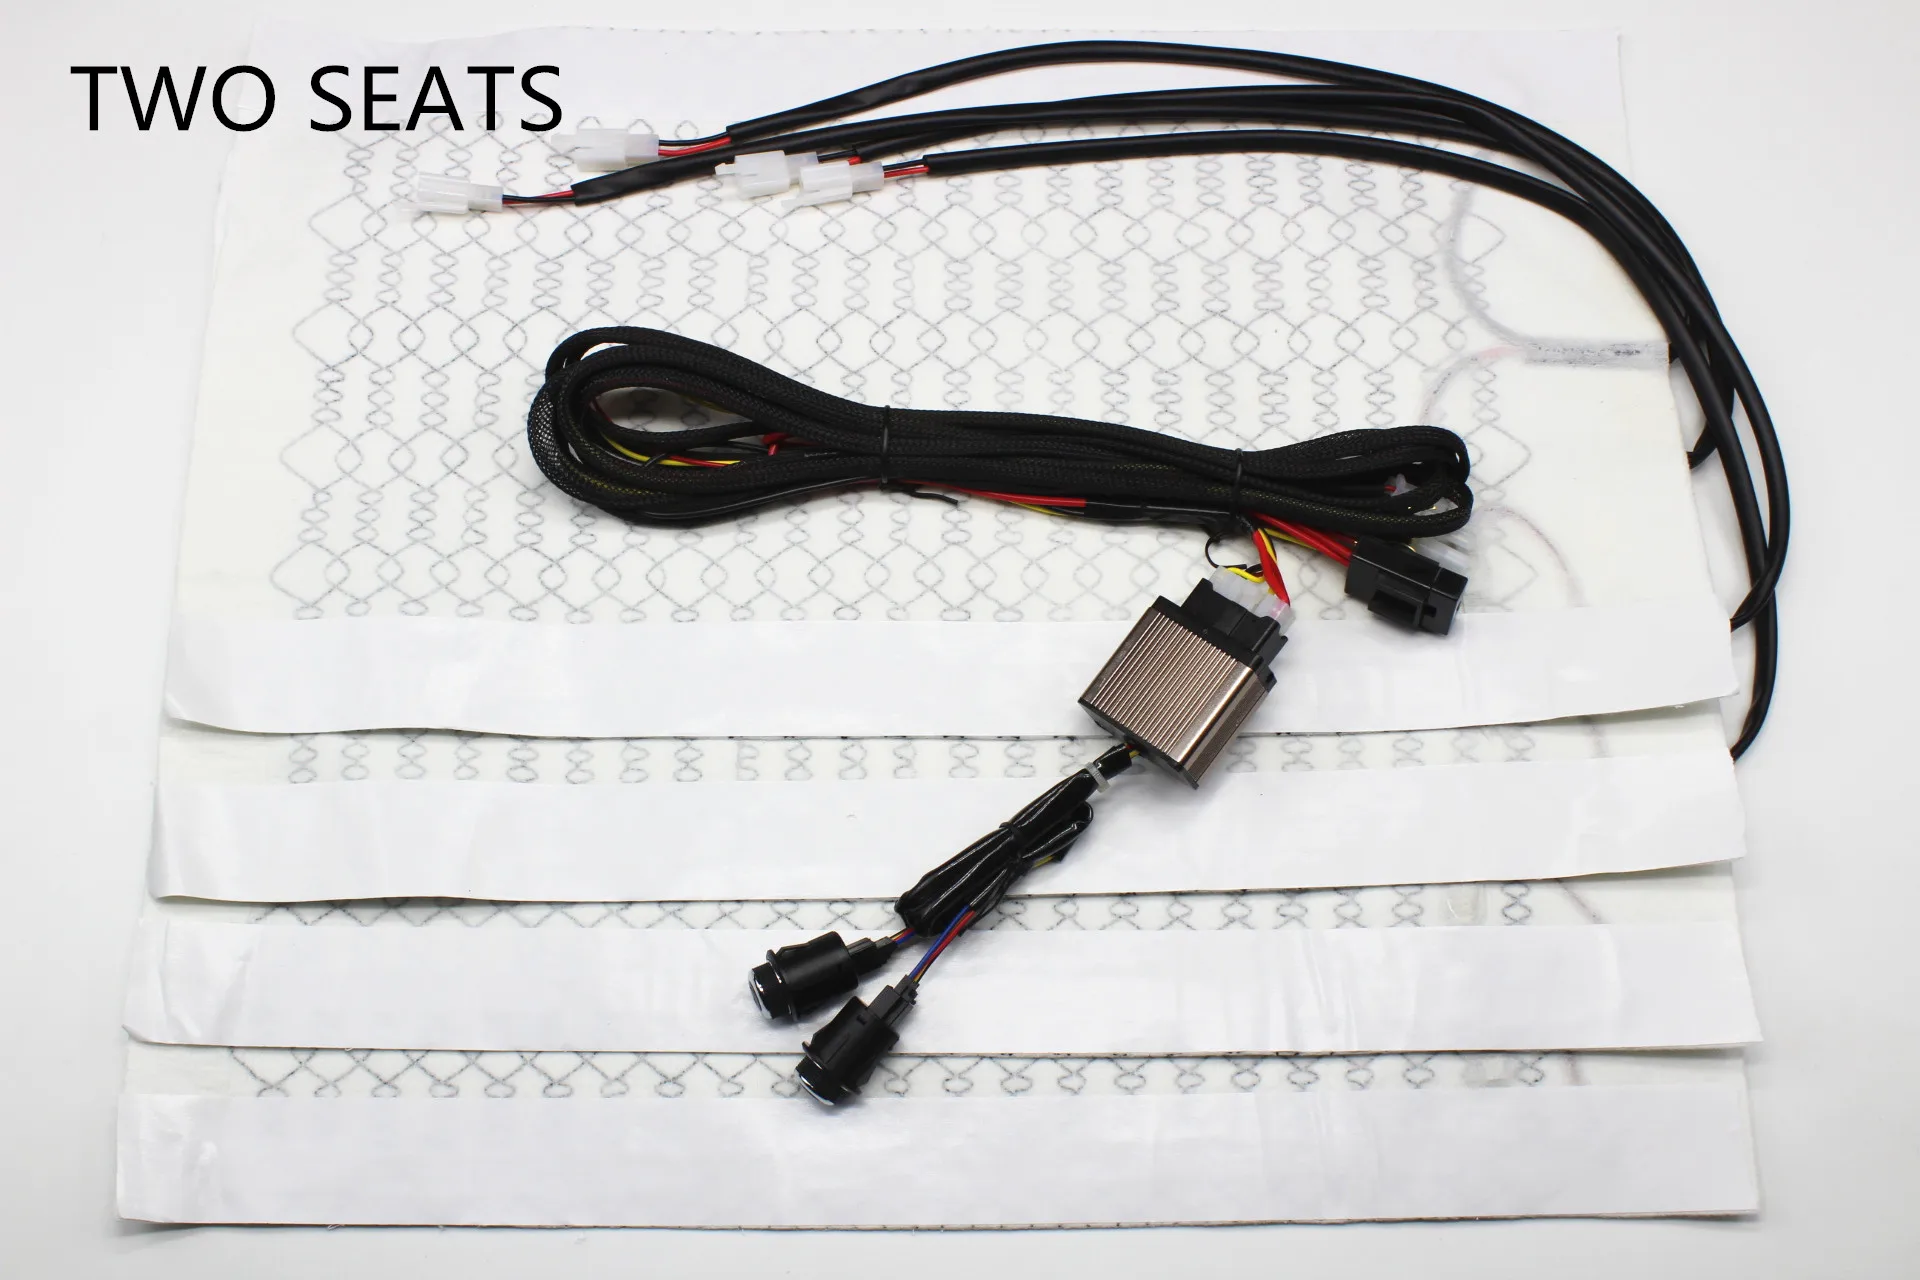 12v carbon fiber heated seat for car suv heater pads 6 position rotary switch button interior seat cover heater warmer support free global shipping